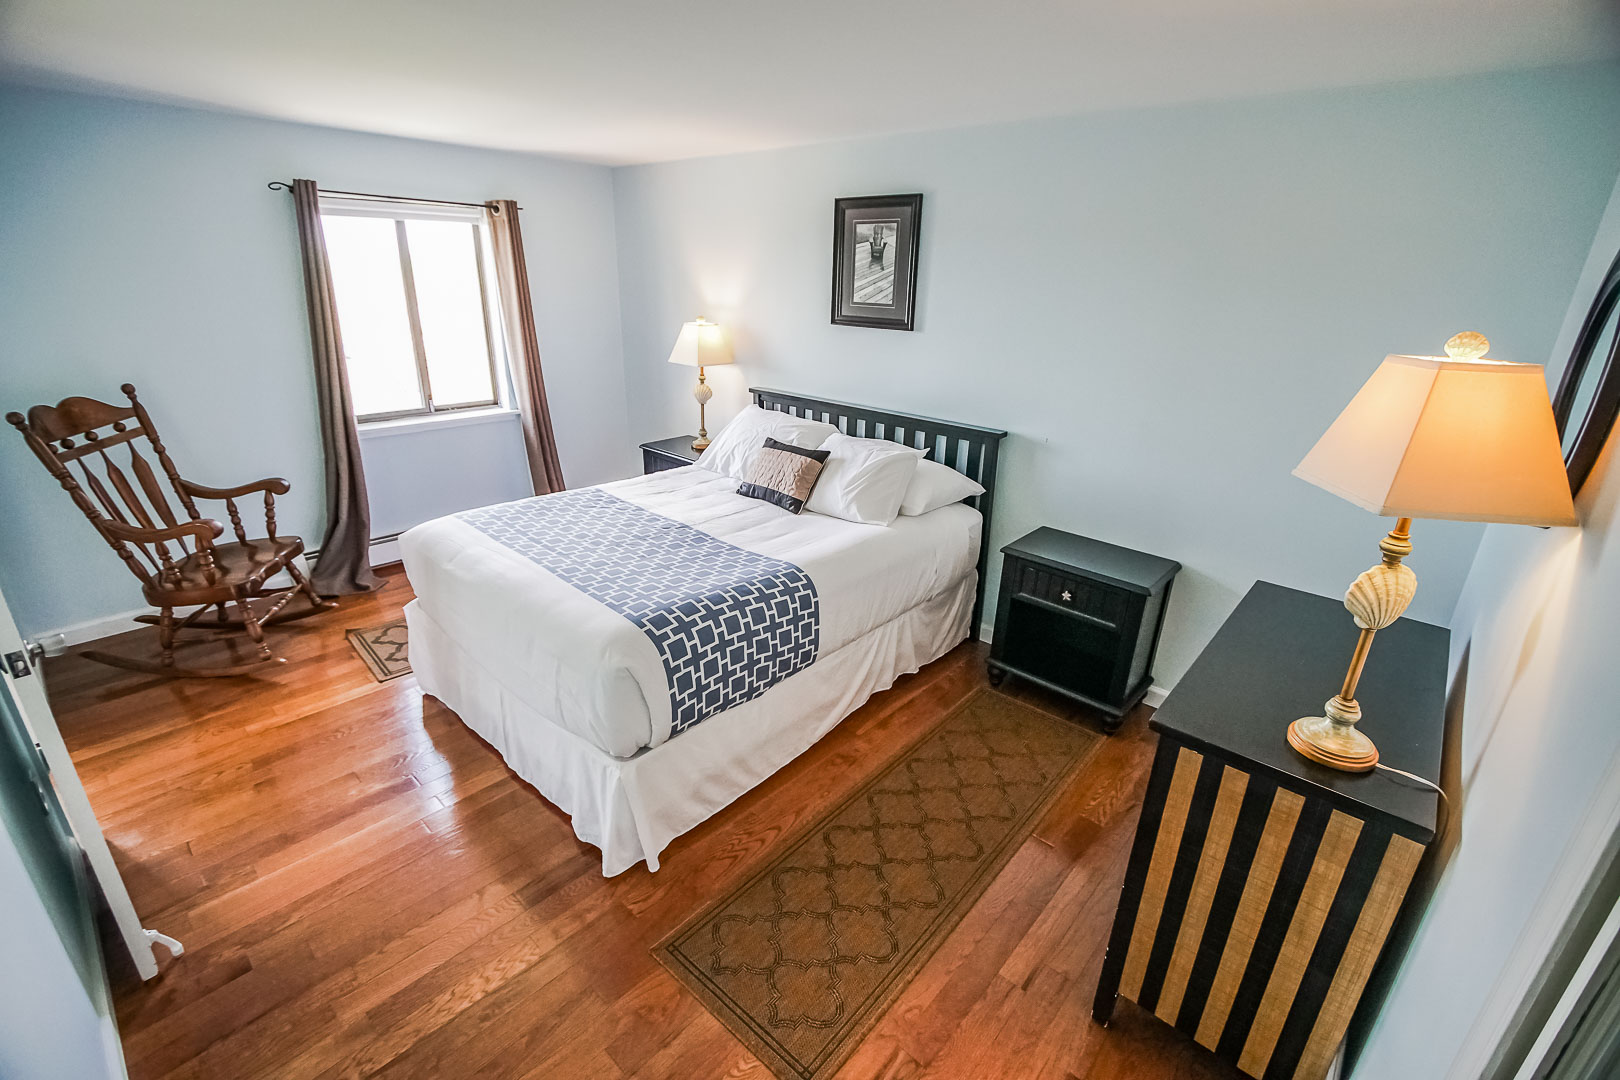 A spacious master bedroom  at VRI's Neptune House Resort in Rhode Island.